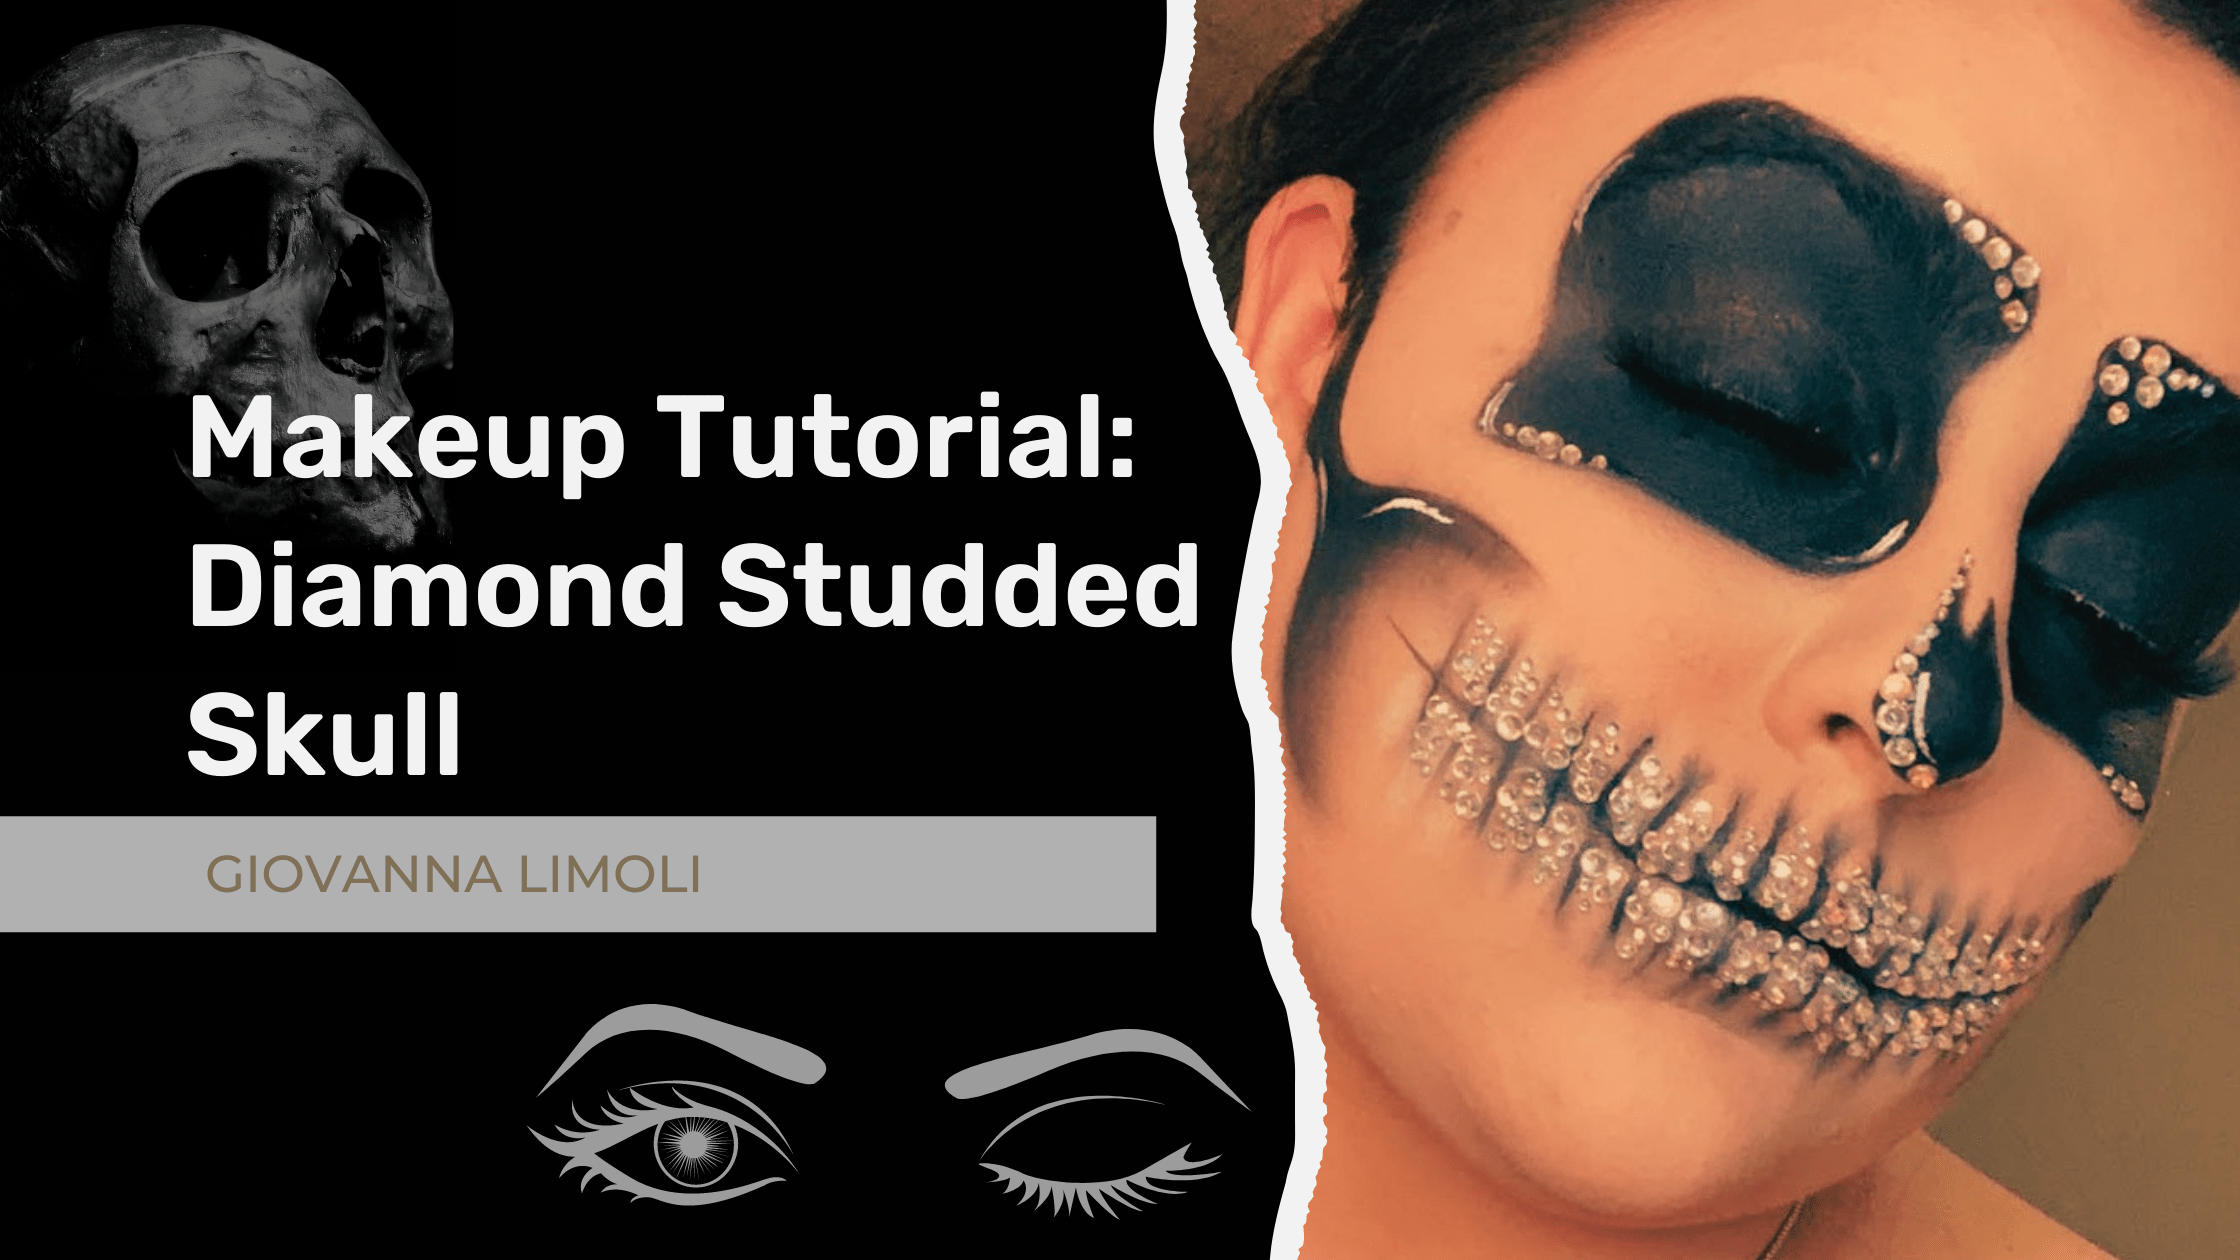 Featured image for “Makeup Tutorial: Diamond Studded Skull”